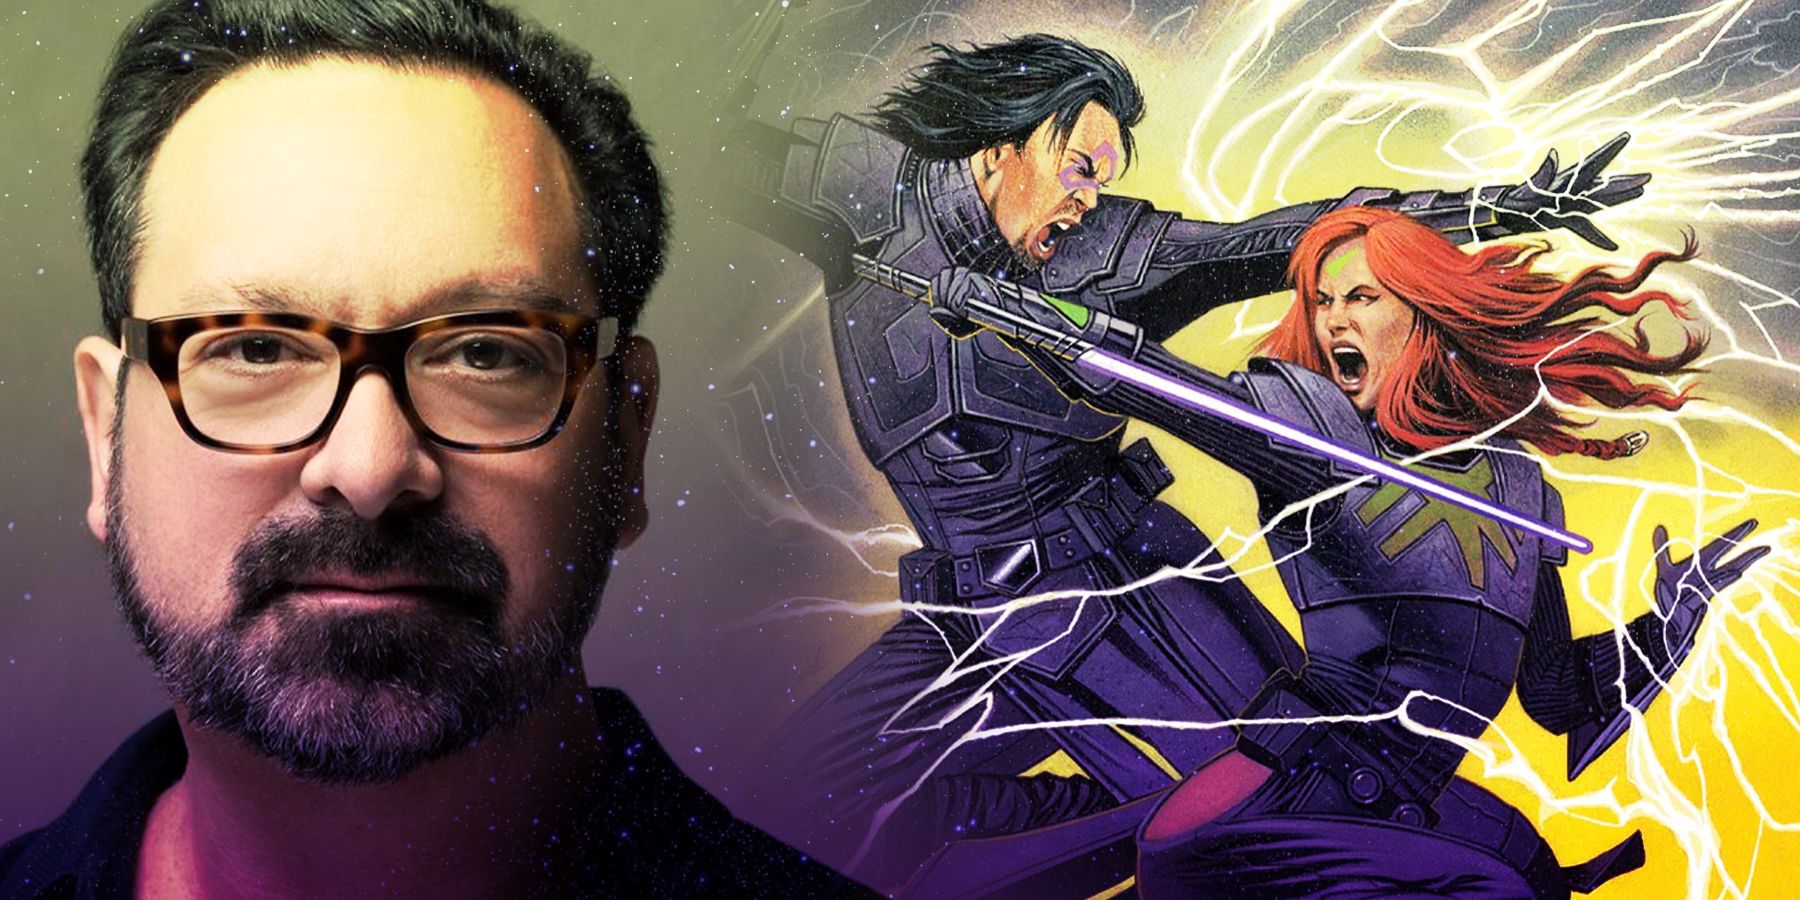 On the left, the director James Mangold. On the right, an illustration from comic 'Dawn of the Jedi; Force War 5' depicting Jedi in battle. 